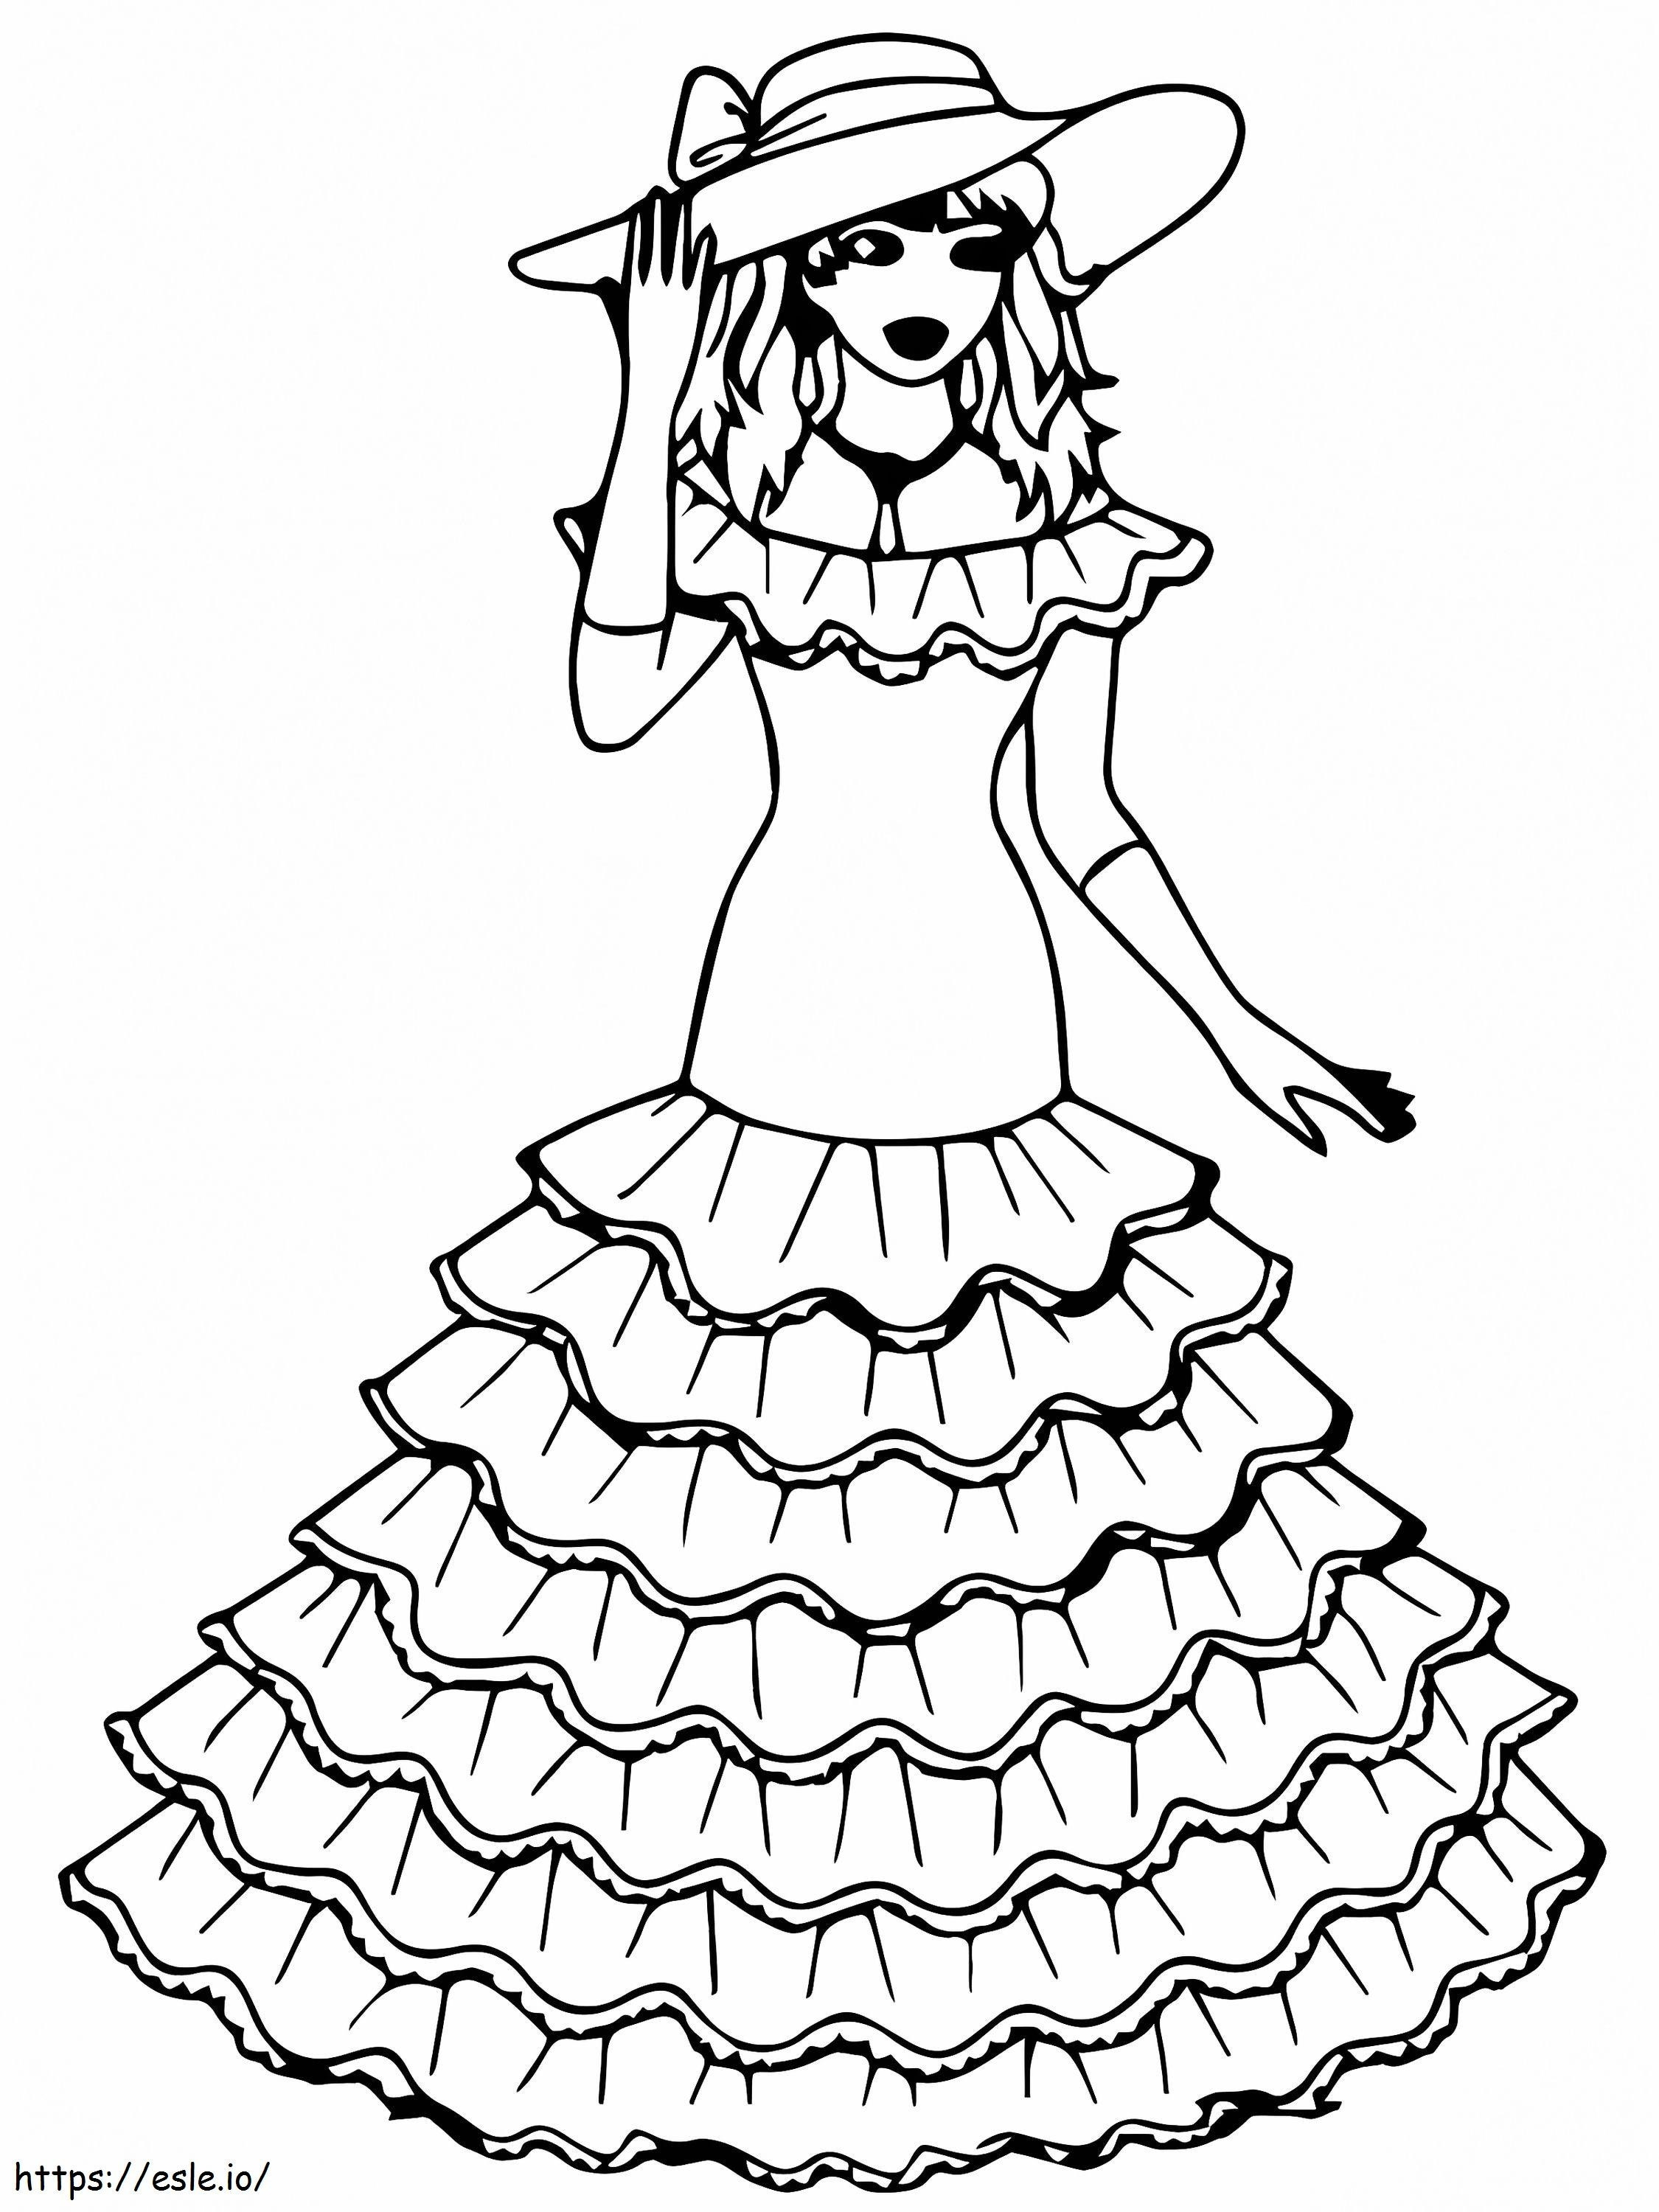 Pleasant Princess And The Pea coloring page